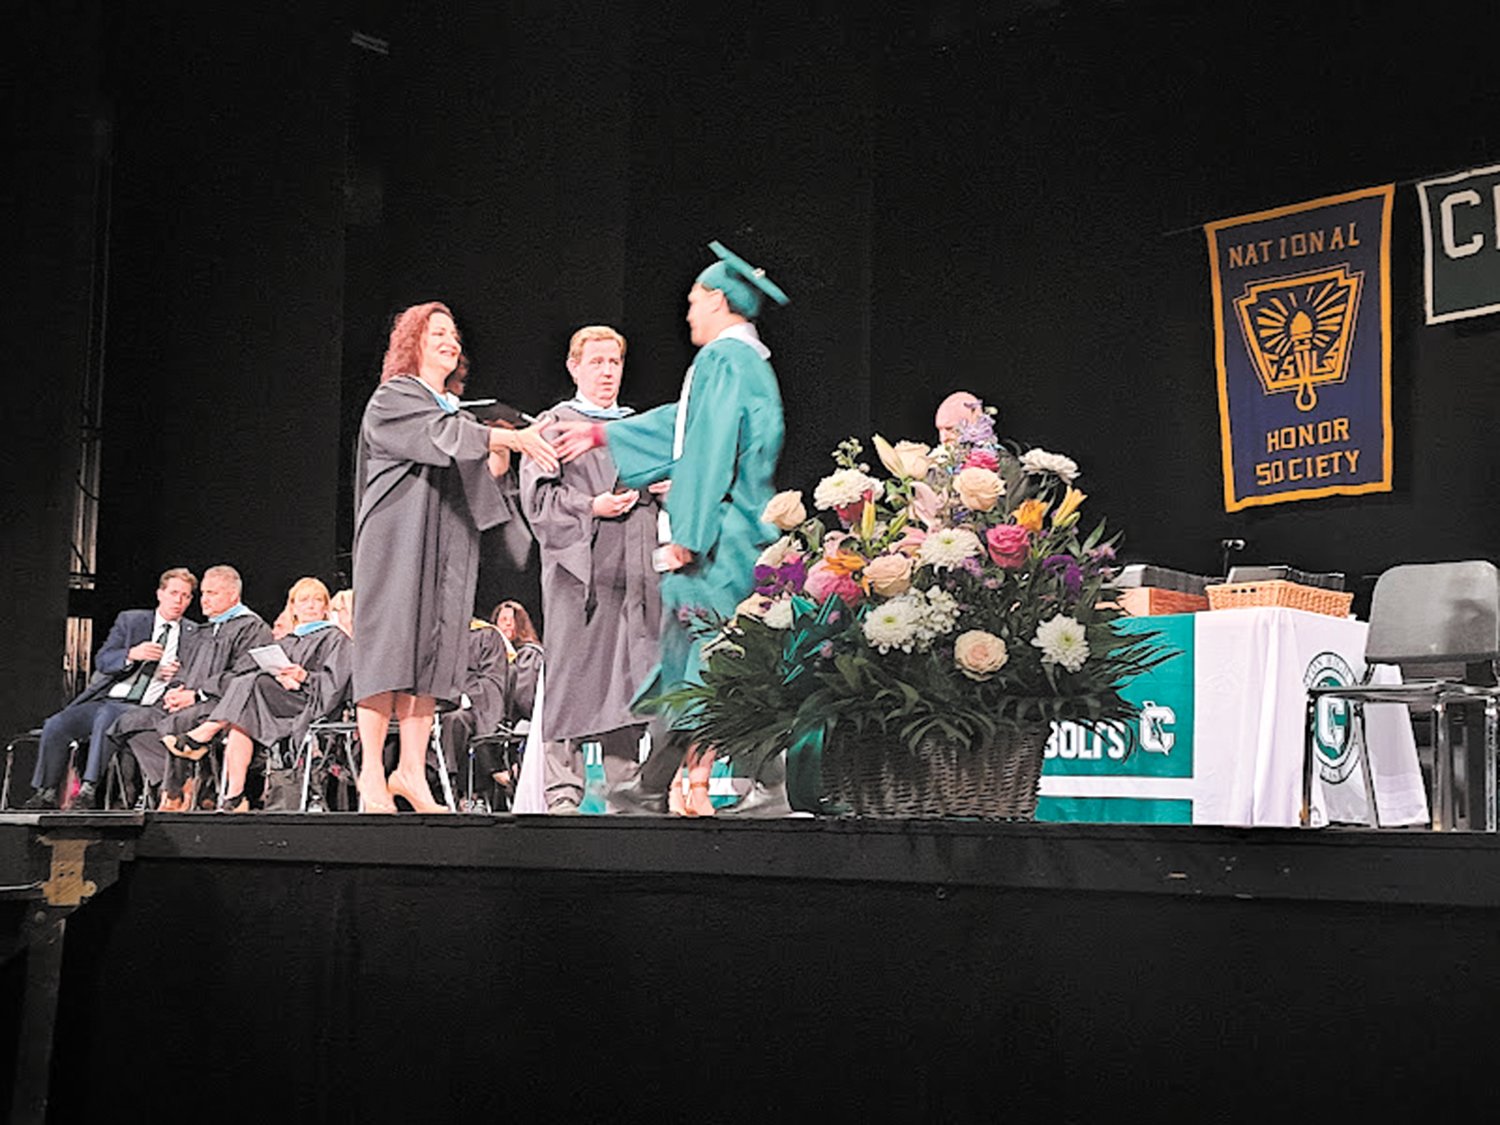 CONGRATULATIONS TO YOU: (above) Superintendent Jeannine Nota-Masse congratulates a student from the Class of 2022 as they receive their diploma.